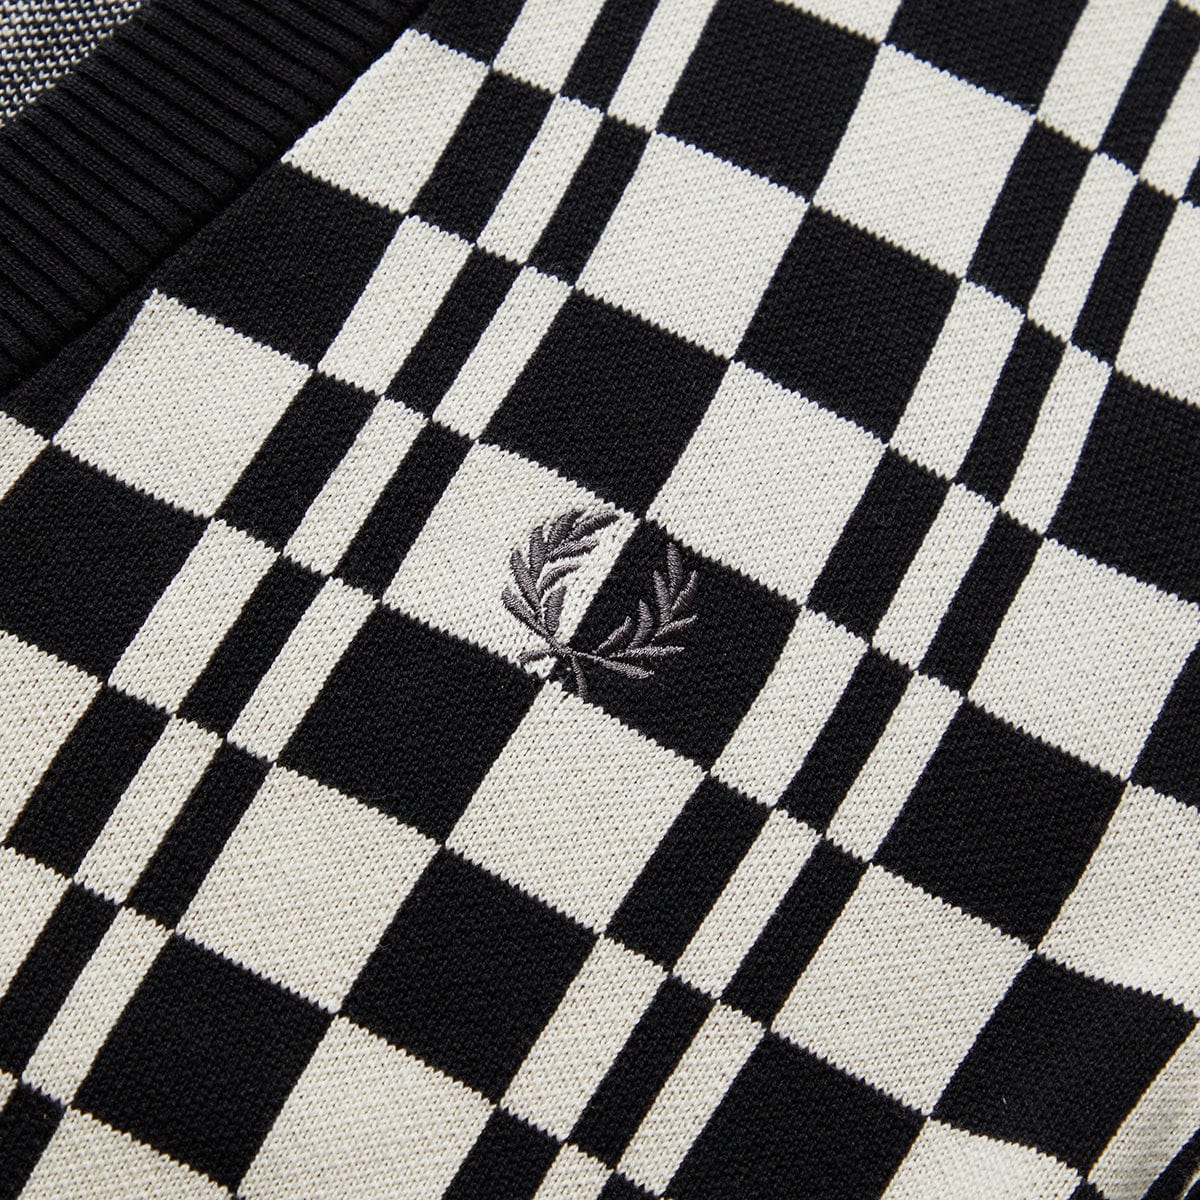 Fred Perry Knitwear CHEQUERBOARD CARDIGAN